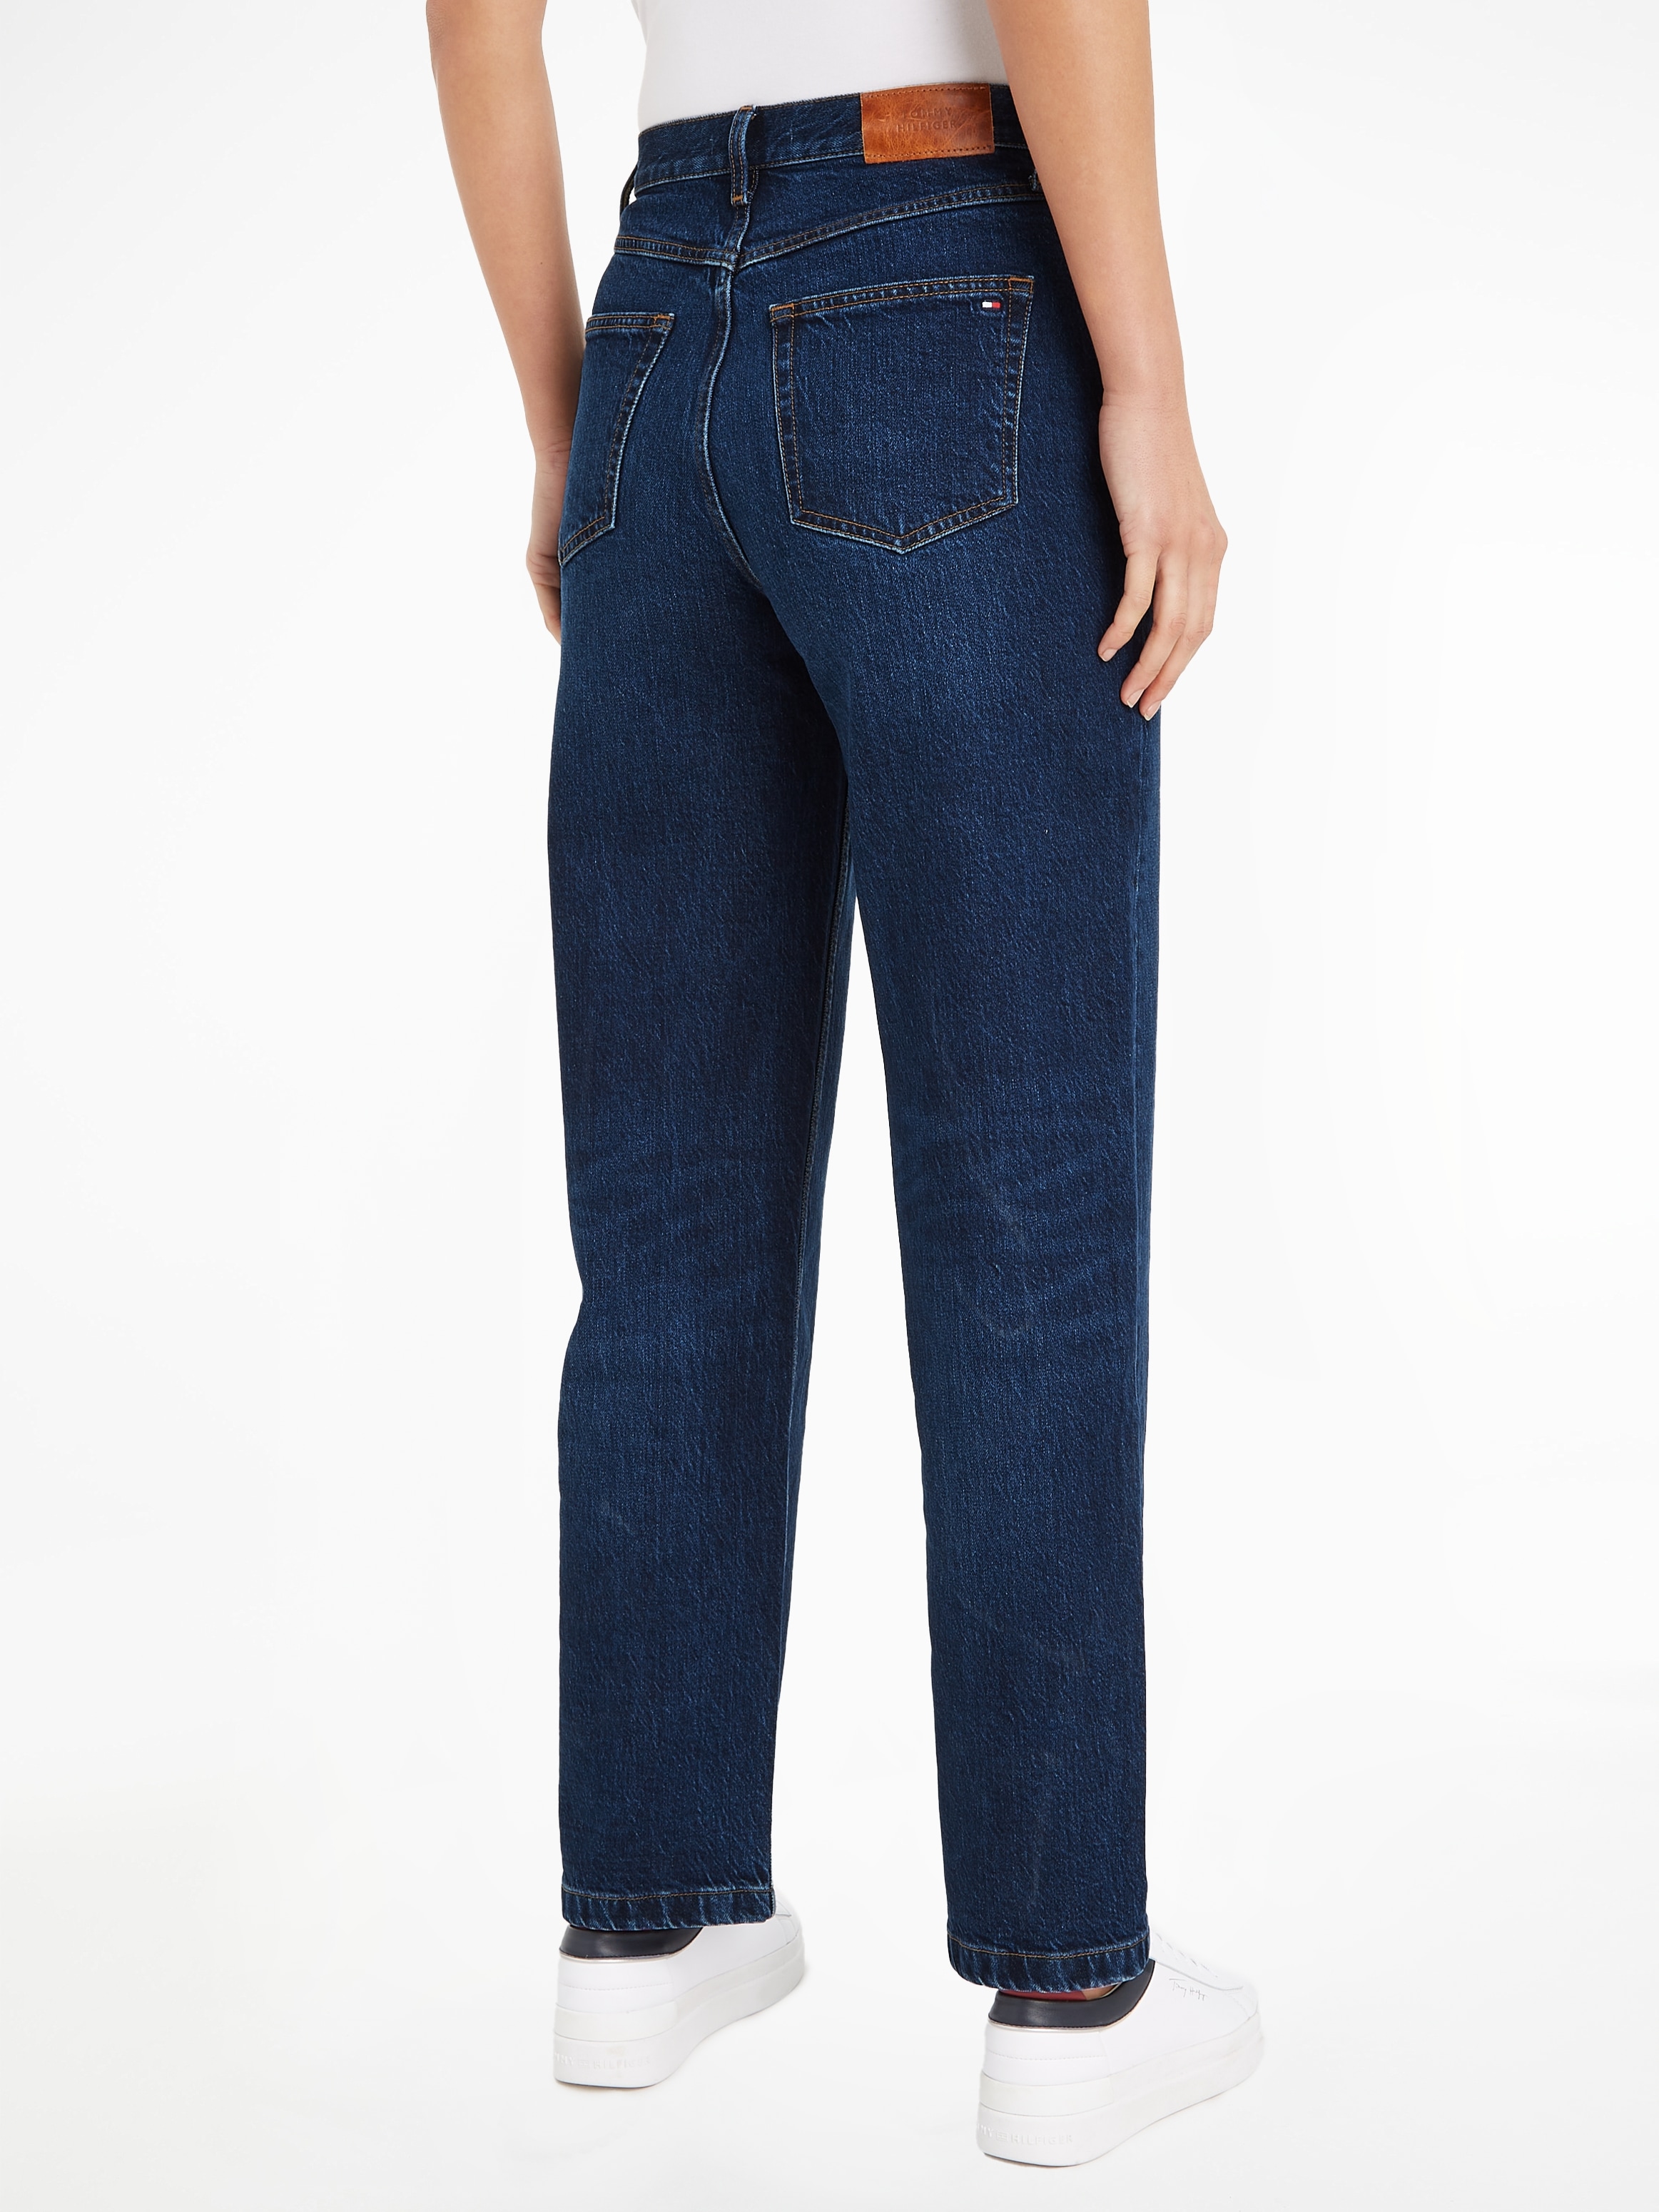 Tommy Waschung weißer HW in Relax-fit-Jeans PAM«, Hilfiger online »RELAXED STRAIGHT